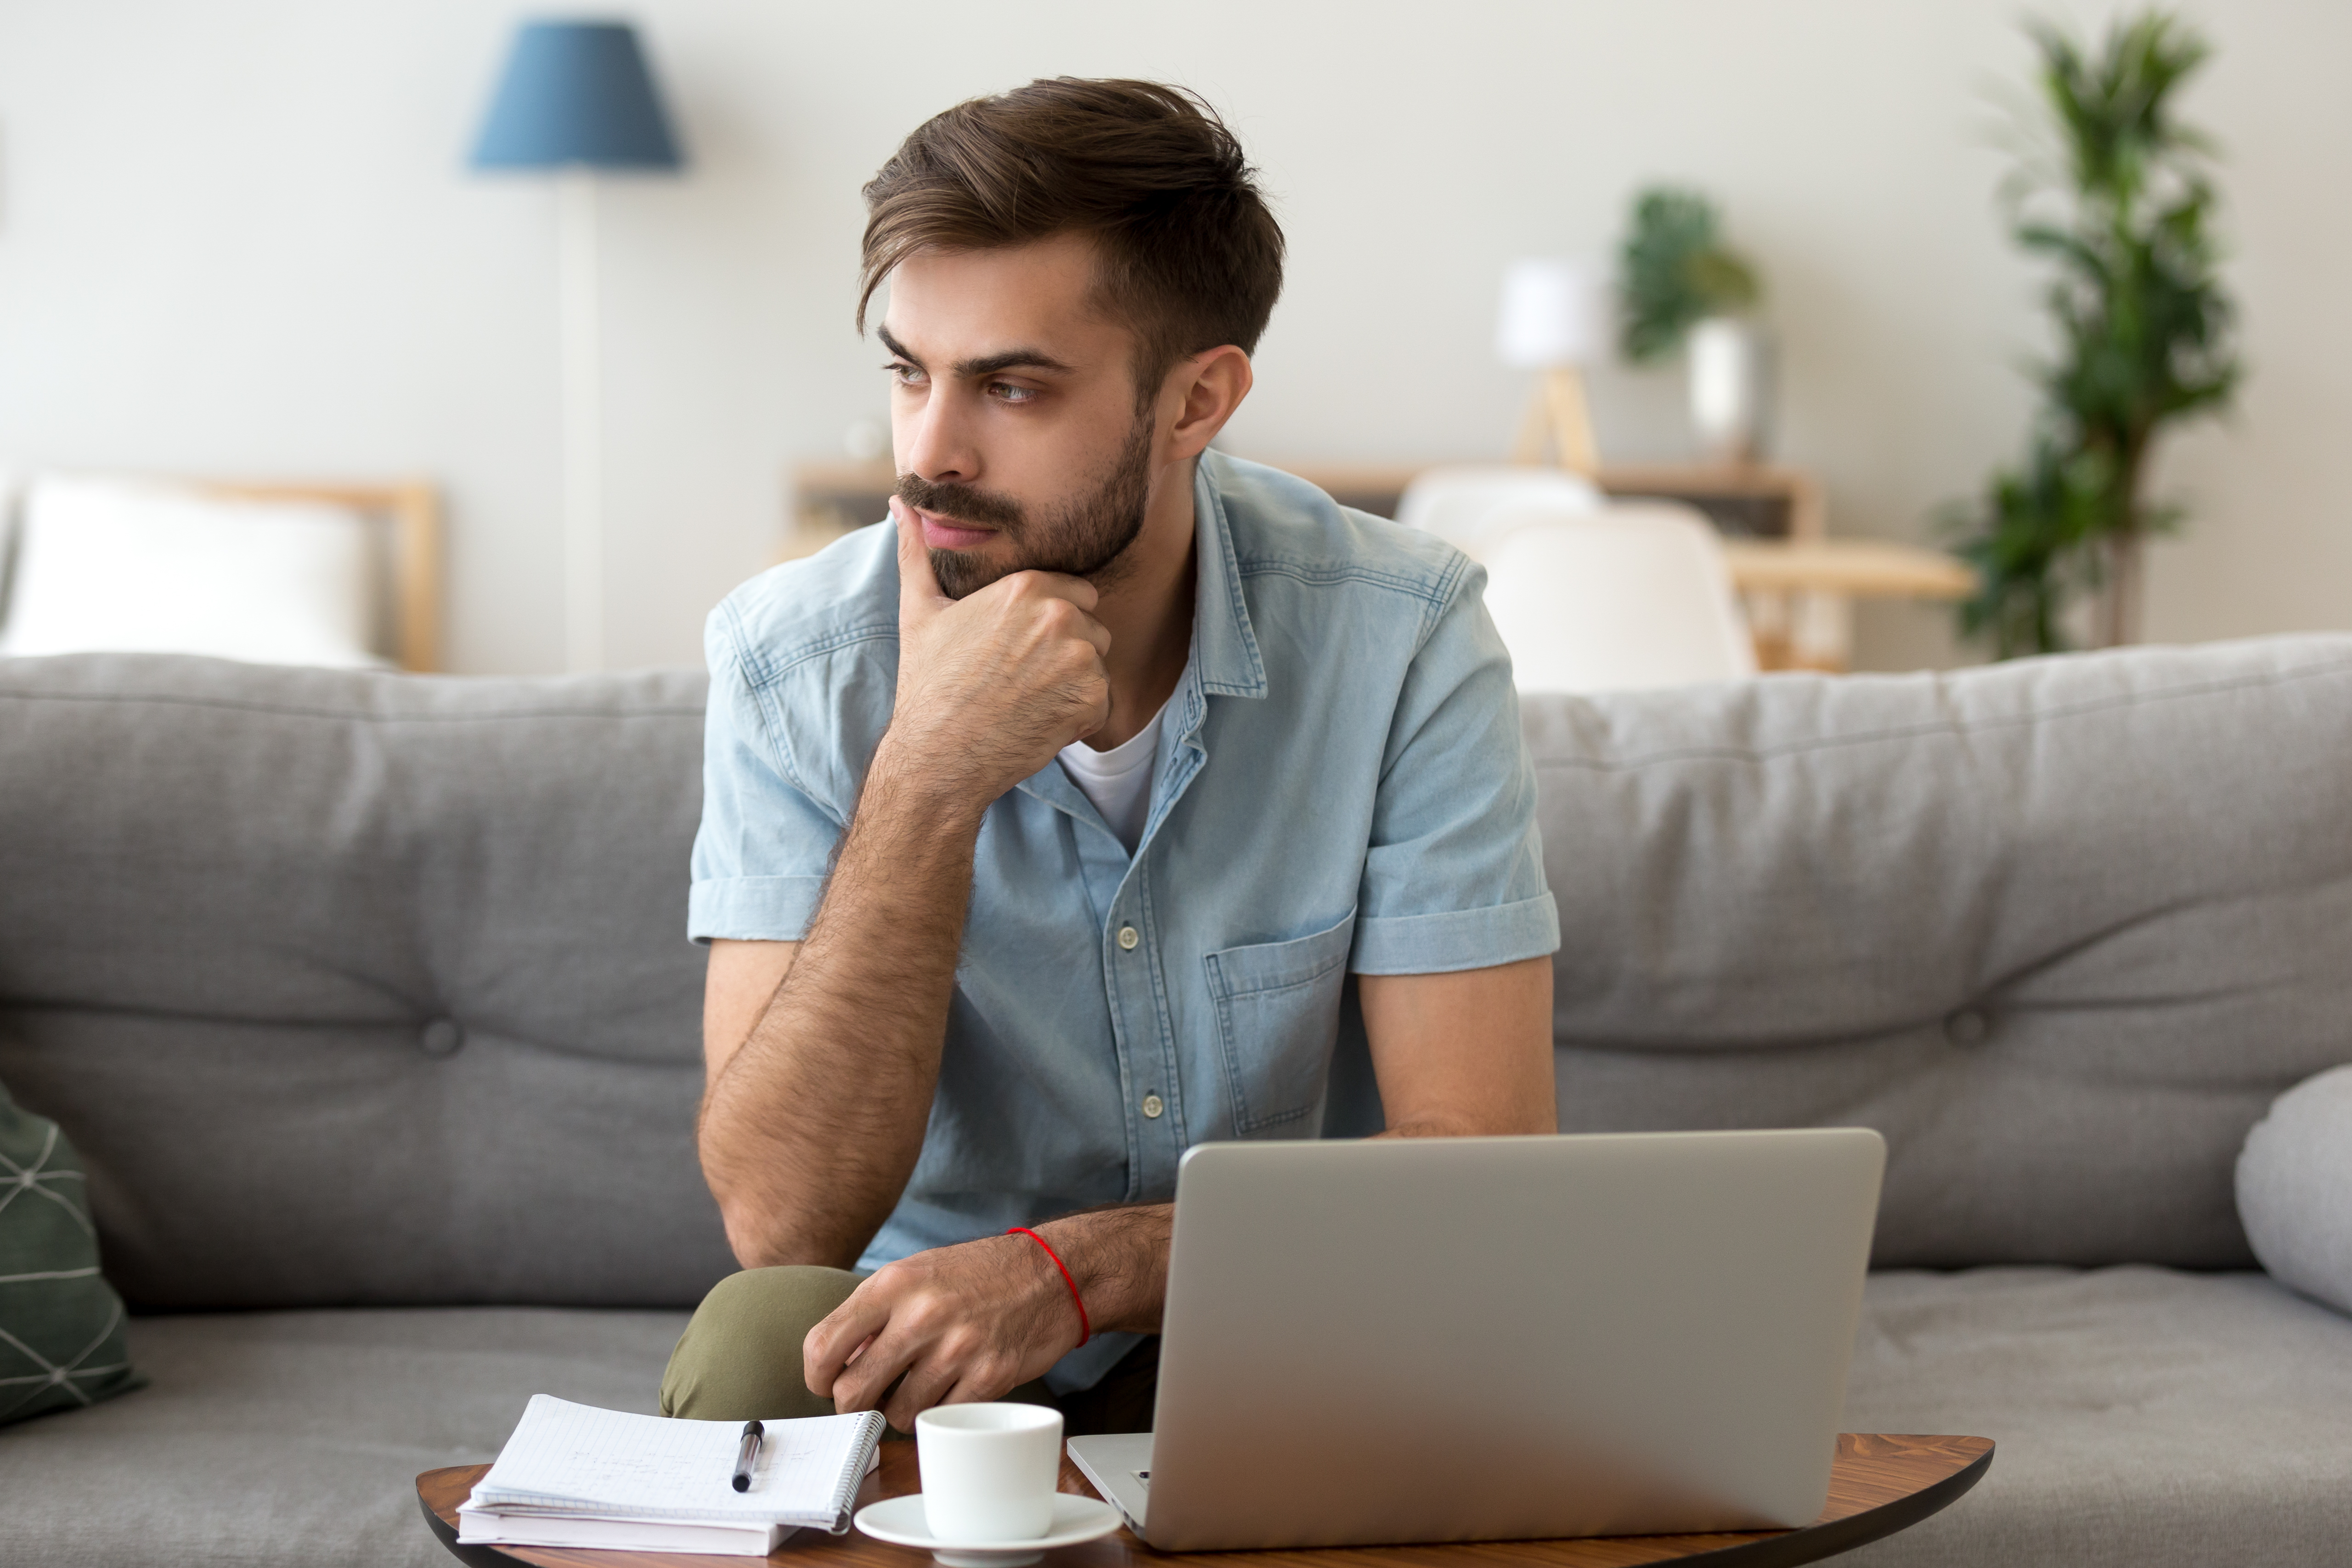 Young man sitting in front of a laptop looking concerned | Source: Shutterstock